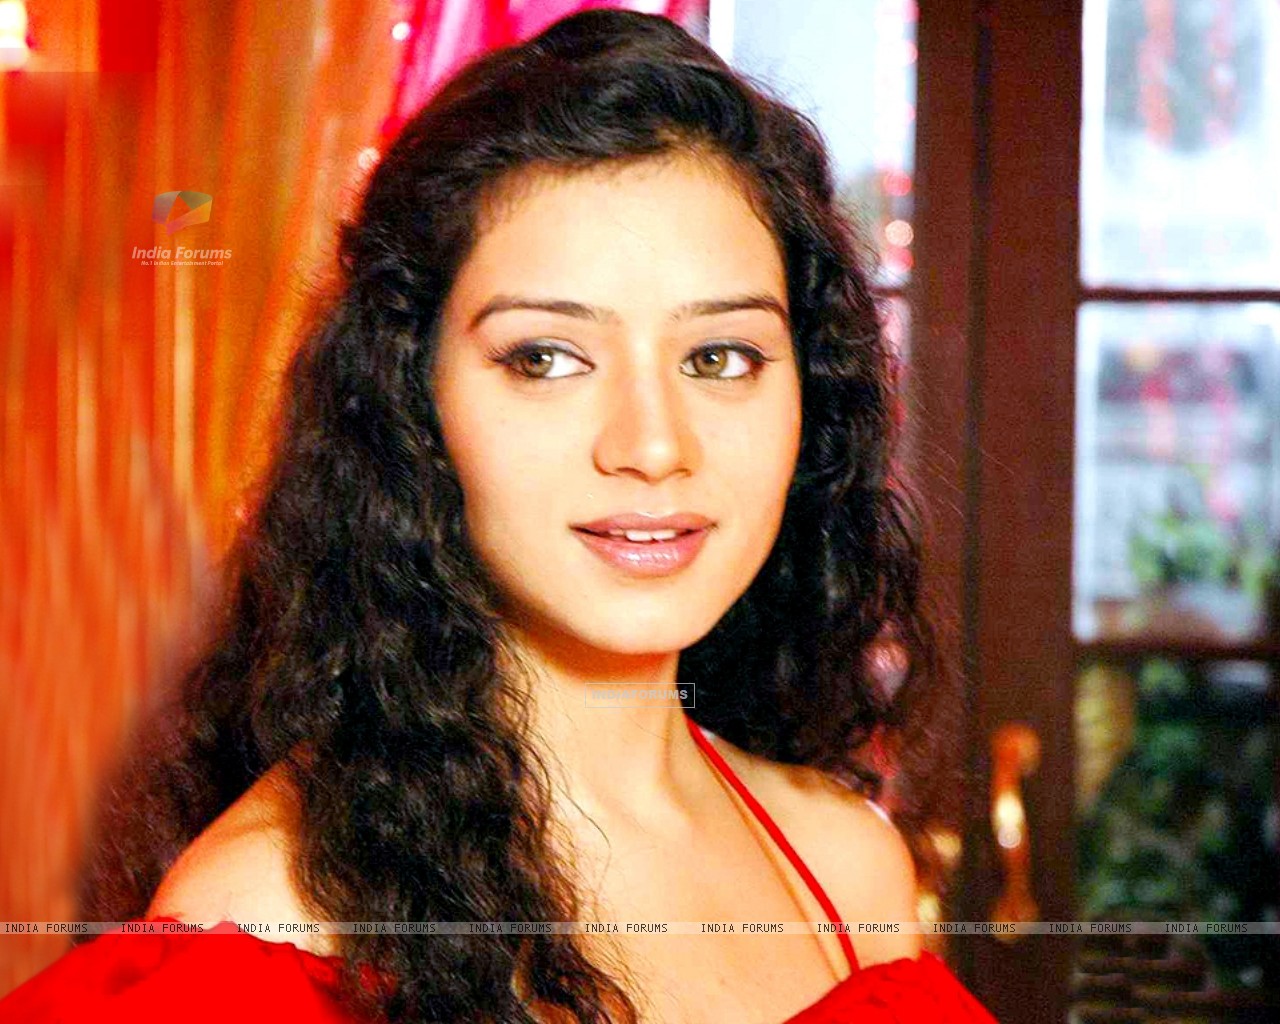 ... Mill Gayye wallpaper images with the image title as &quot;Sukirti Kandpal as Dr. Riddhima&quot; : Sukirti Kandpal as Dr. Riddhima 800x600 | Sukirti Kandpal as Dr. ... - 171909-sukirti-kandpal-as-dr-riddhima